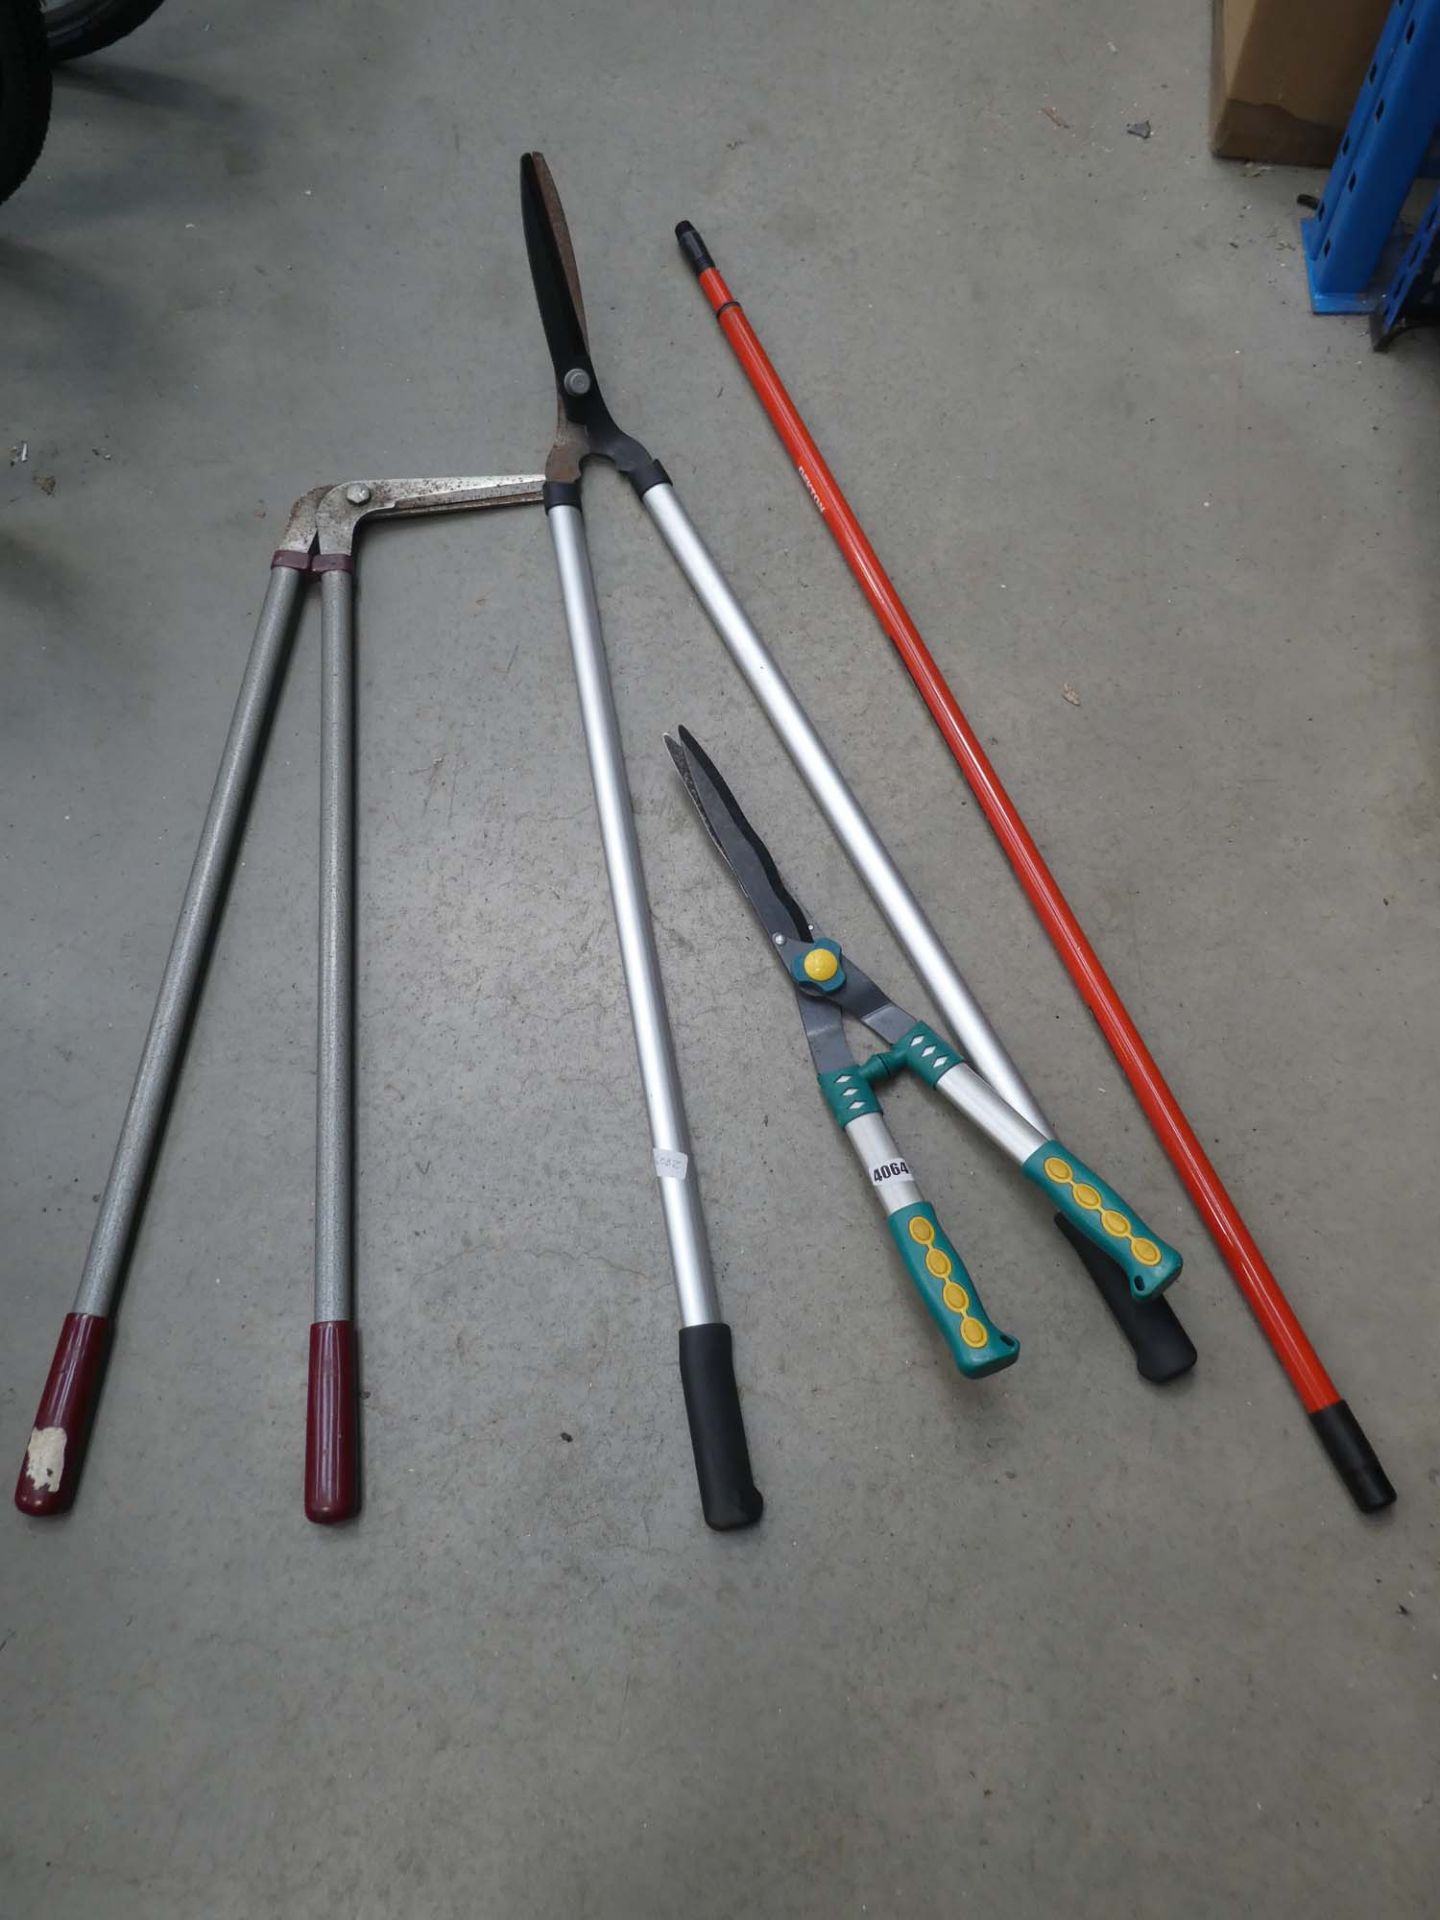 2 pairs of long shears, pair of hedging shears and telescopic pole